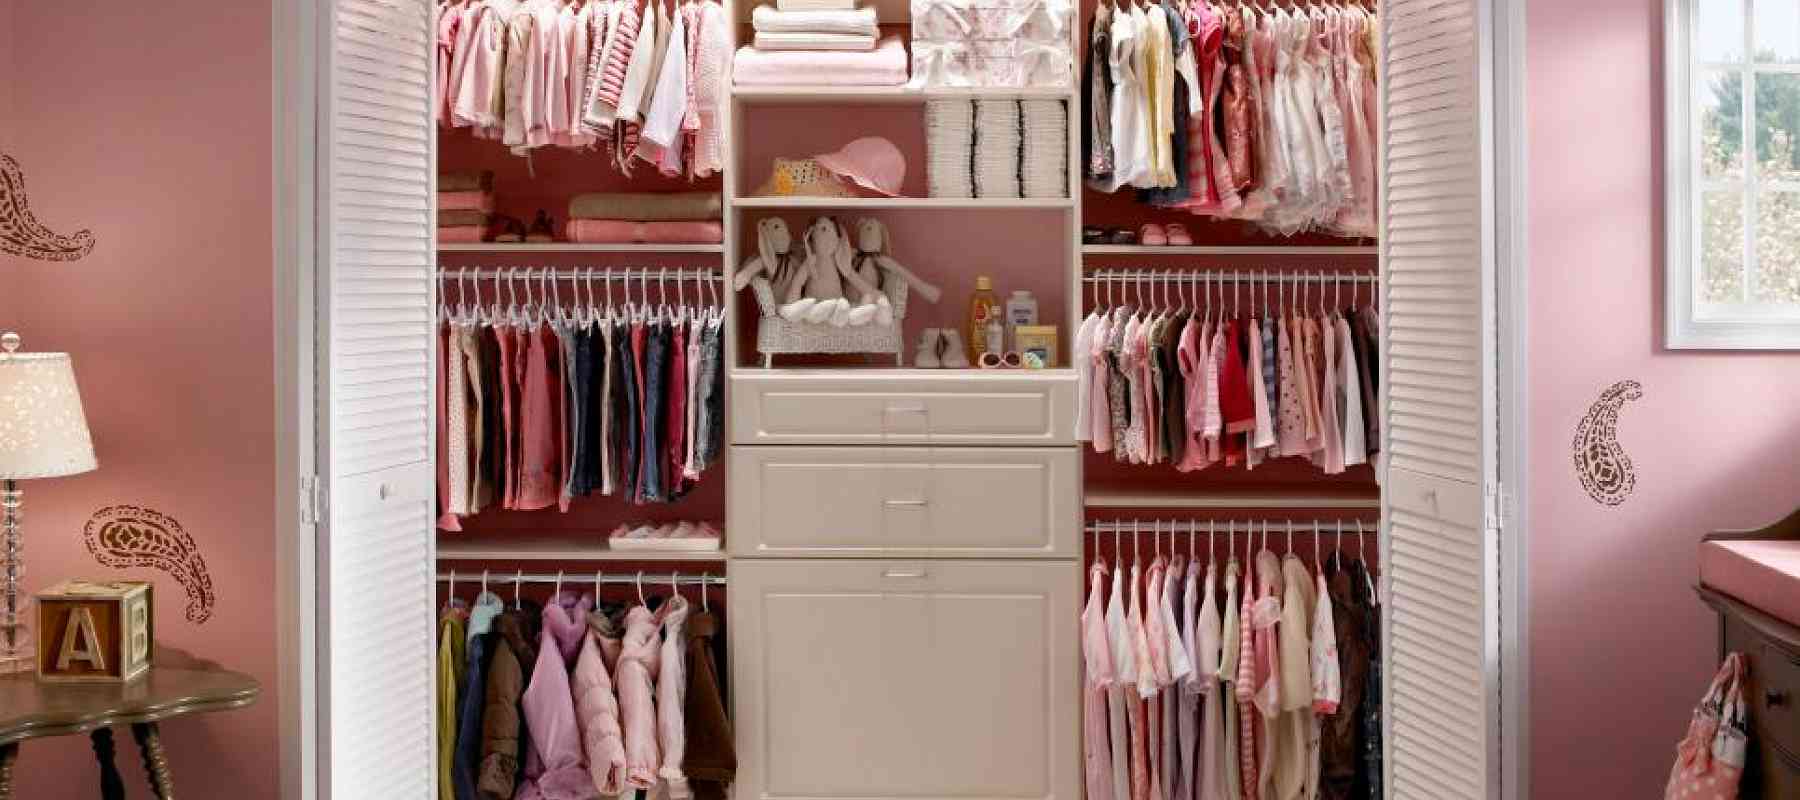 Make Baby Space by Customizing a Closet